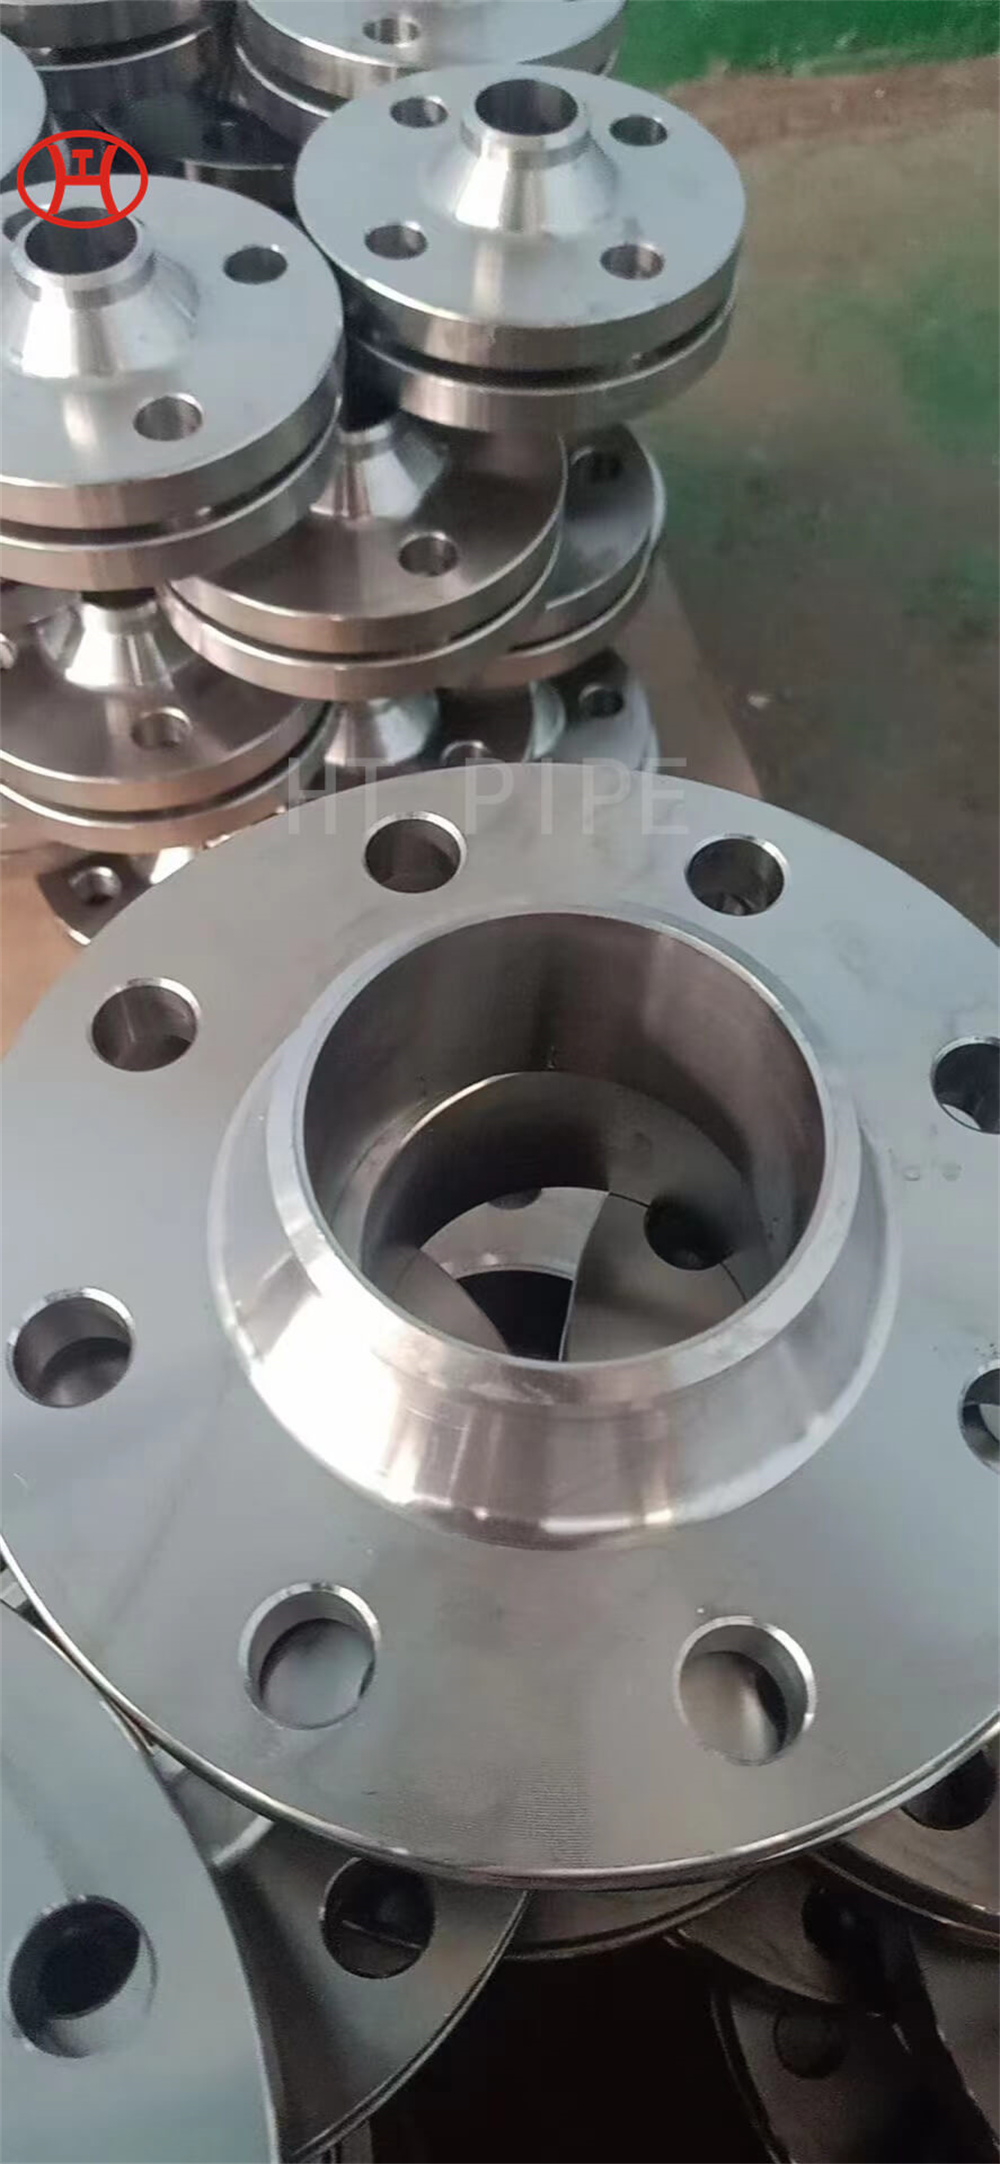 Stainless Steel 304 Threaded flange 5 inch  300lbs